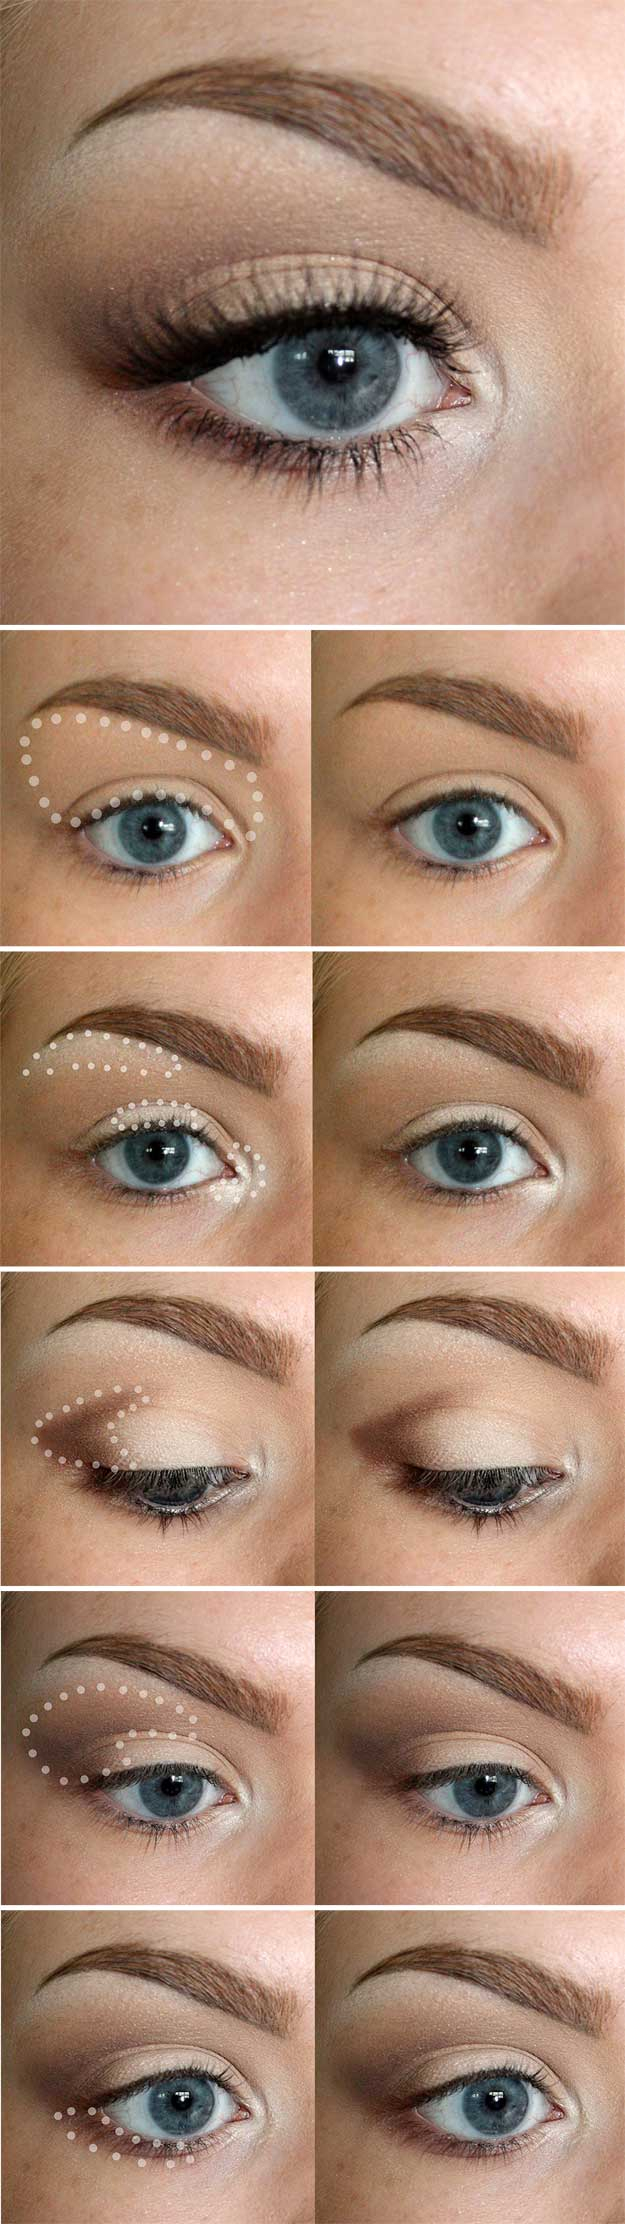 How To Do Makeup For Blue Eyes 35 Wedding Makeup For Blue Eyes The Goddess